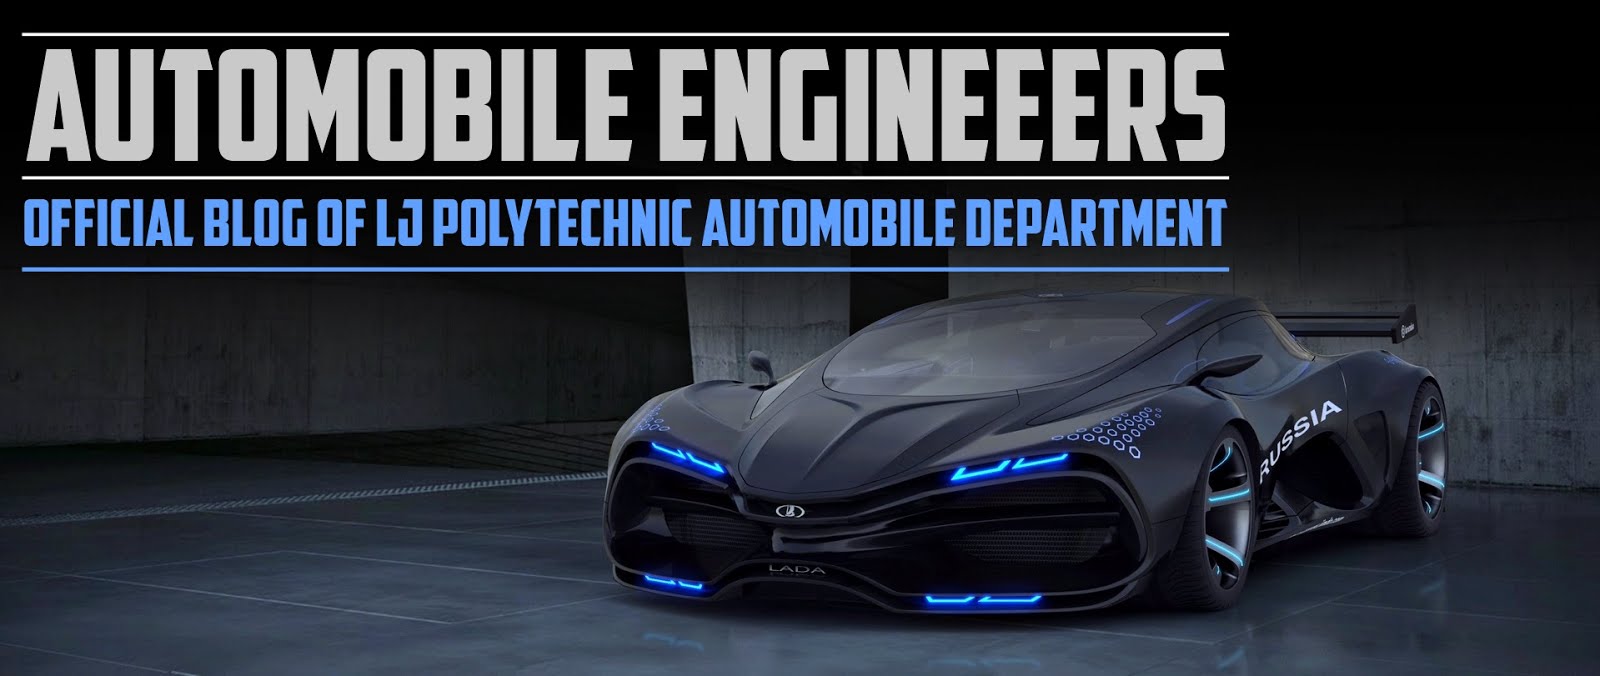 Automobile Enginners